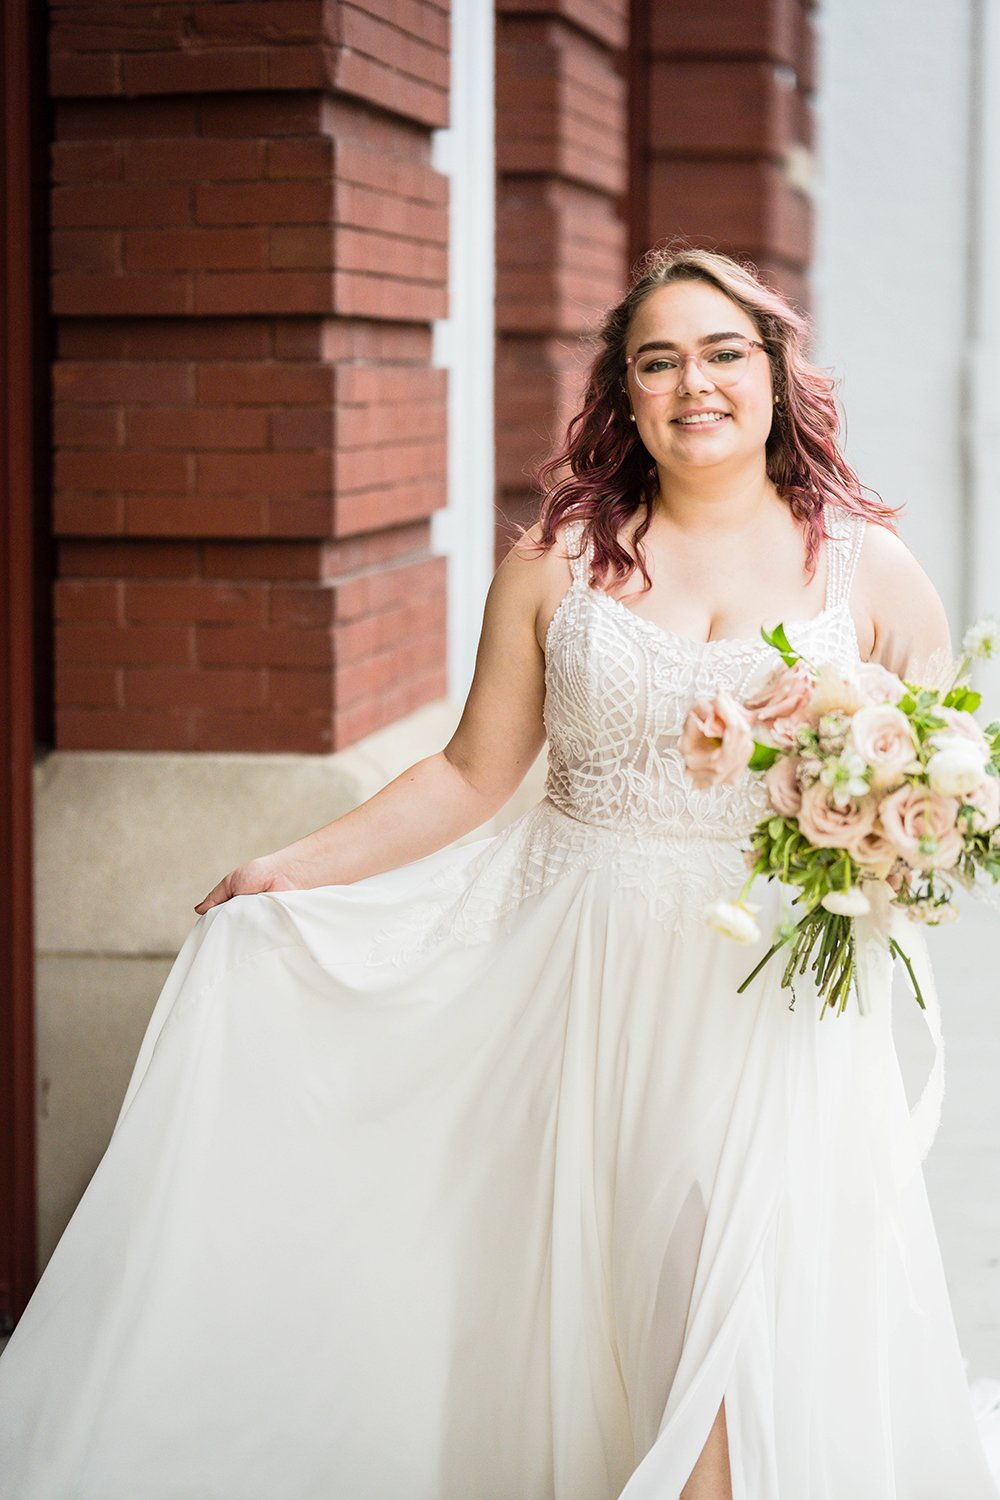 A marrier walks in front of the Fire Station One Boutique Hotel in Downtown Roanoke while holding their dress in one hand and their wedding bouquet in the other hand.